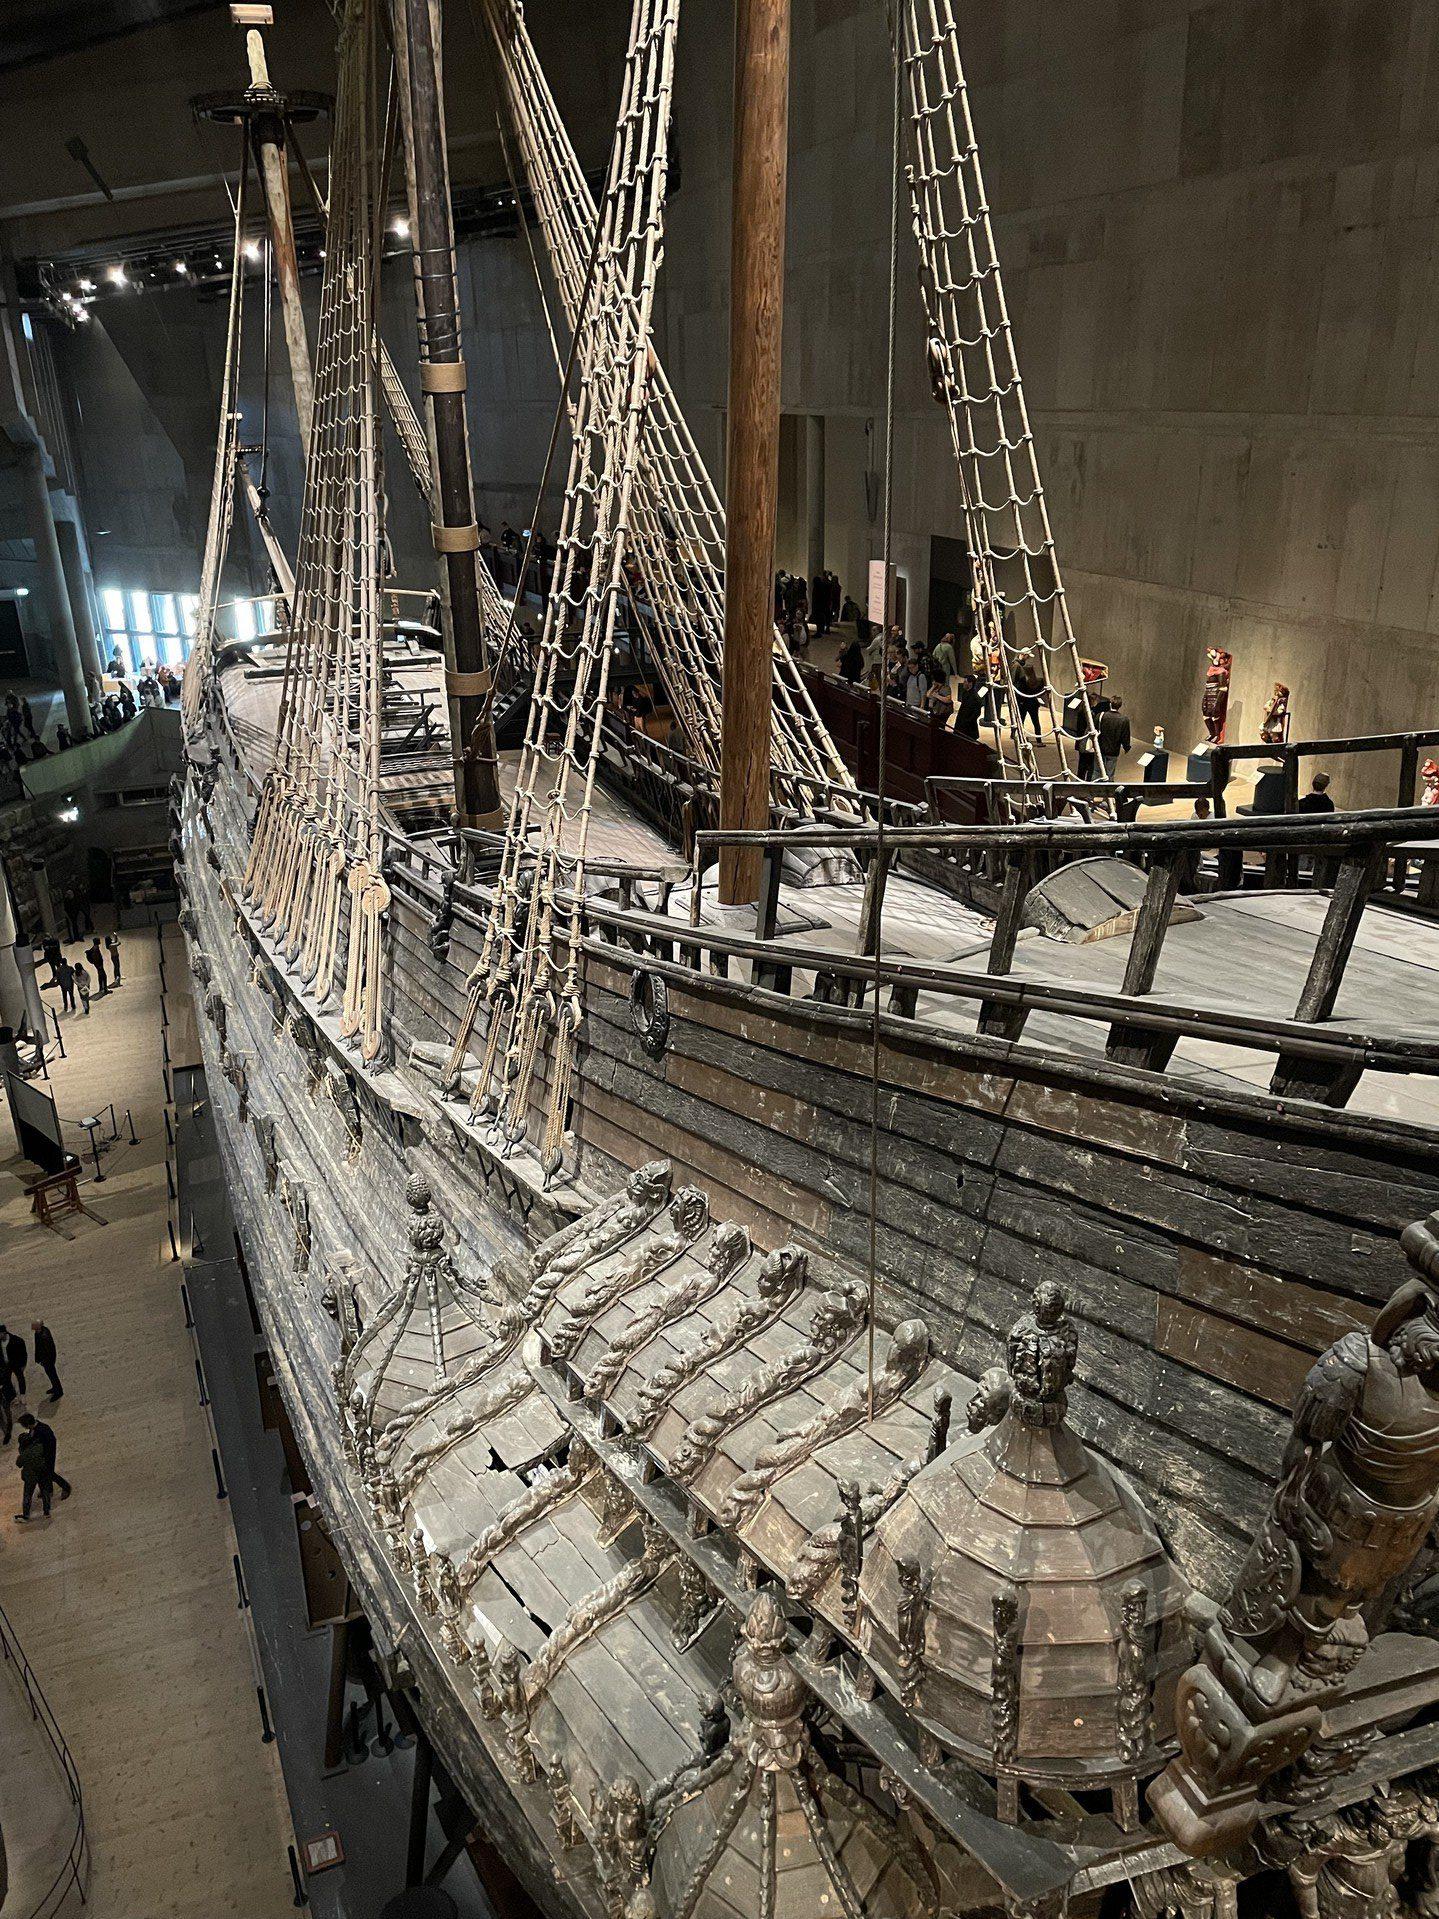 A view of the Vasa from above and behind the aftercastle